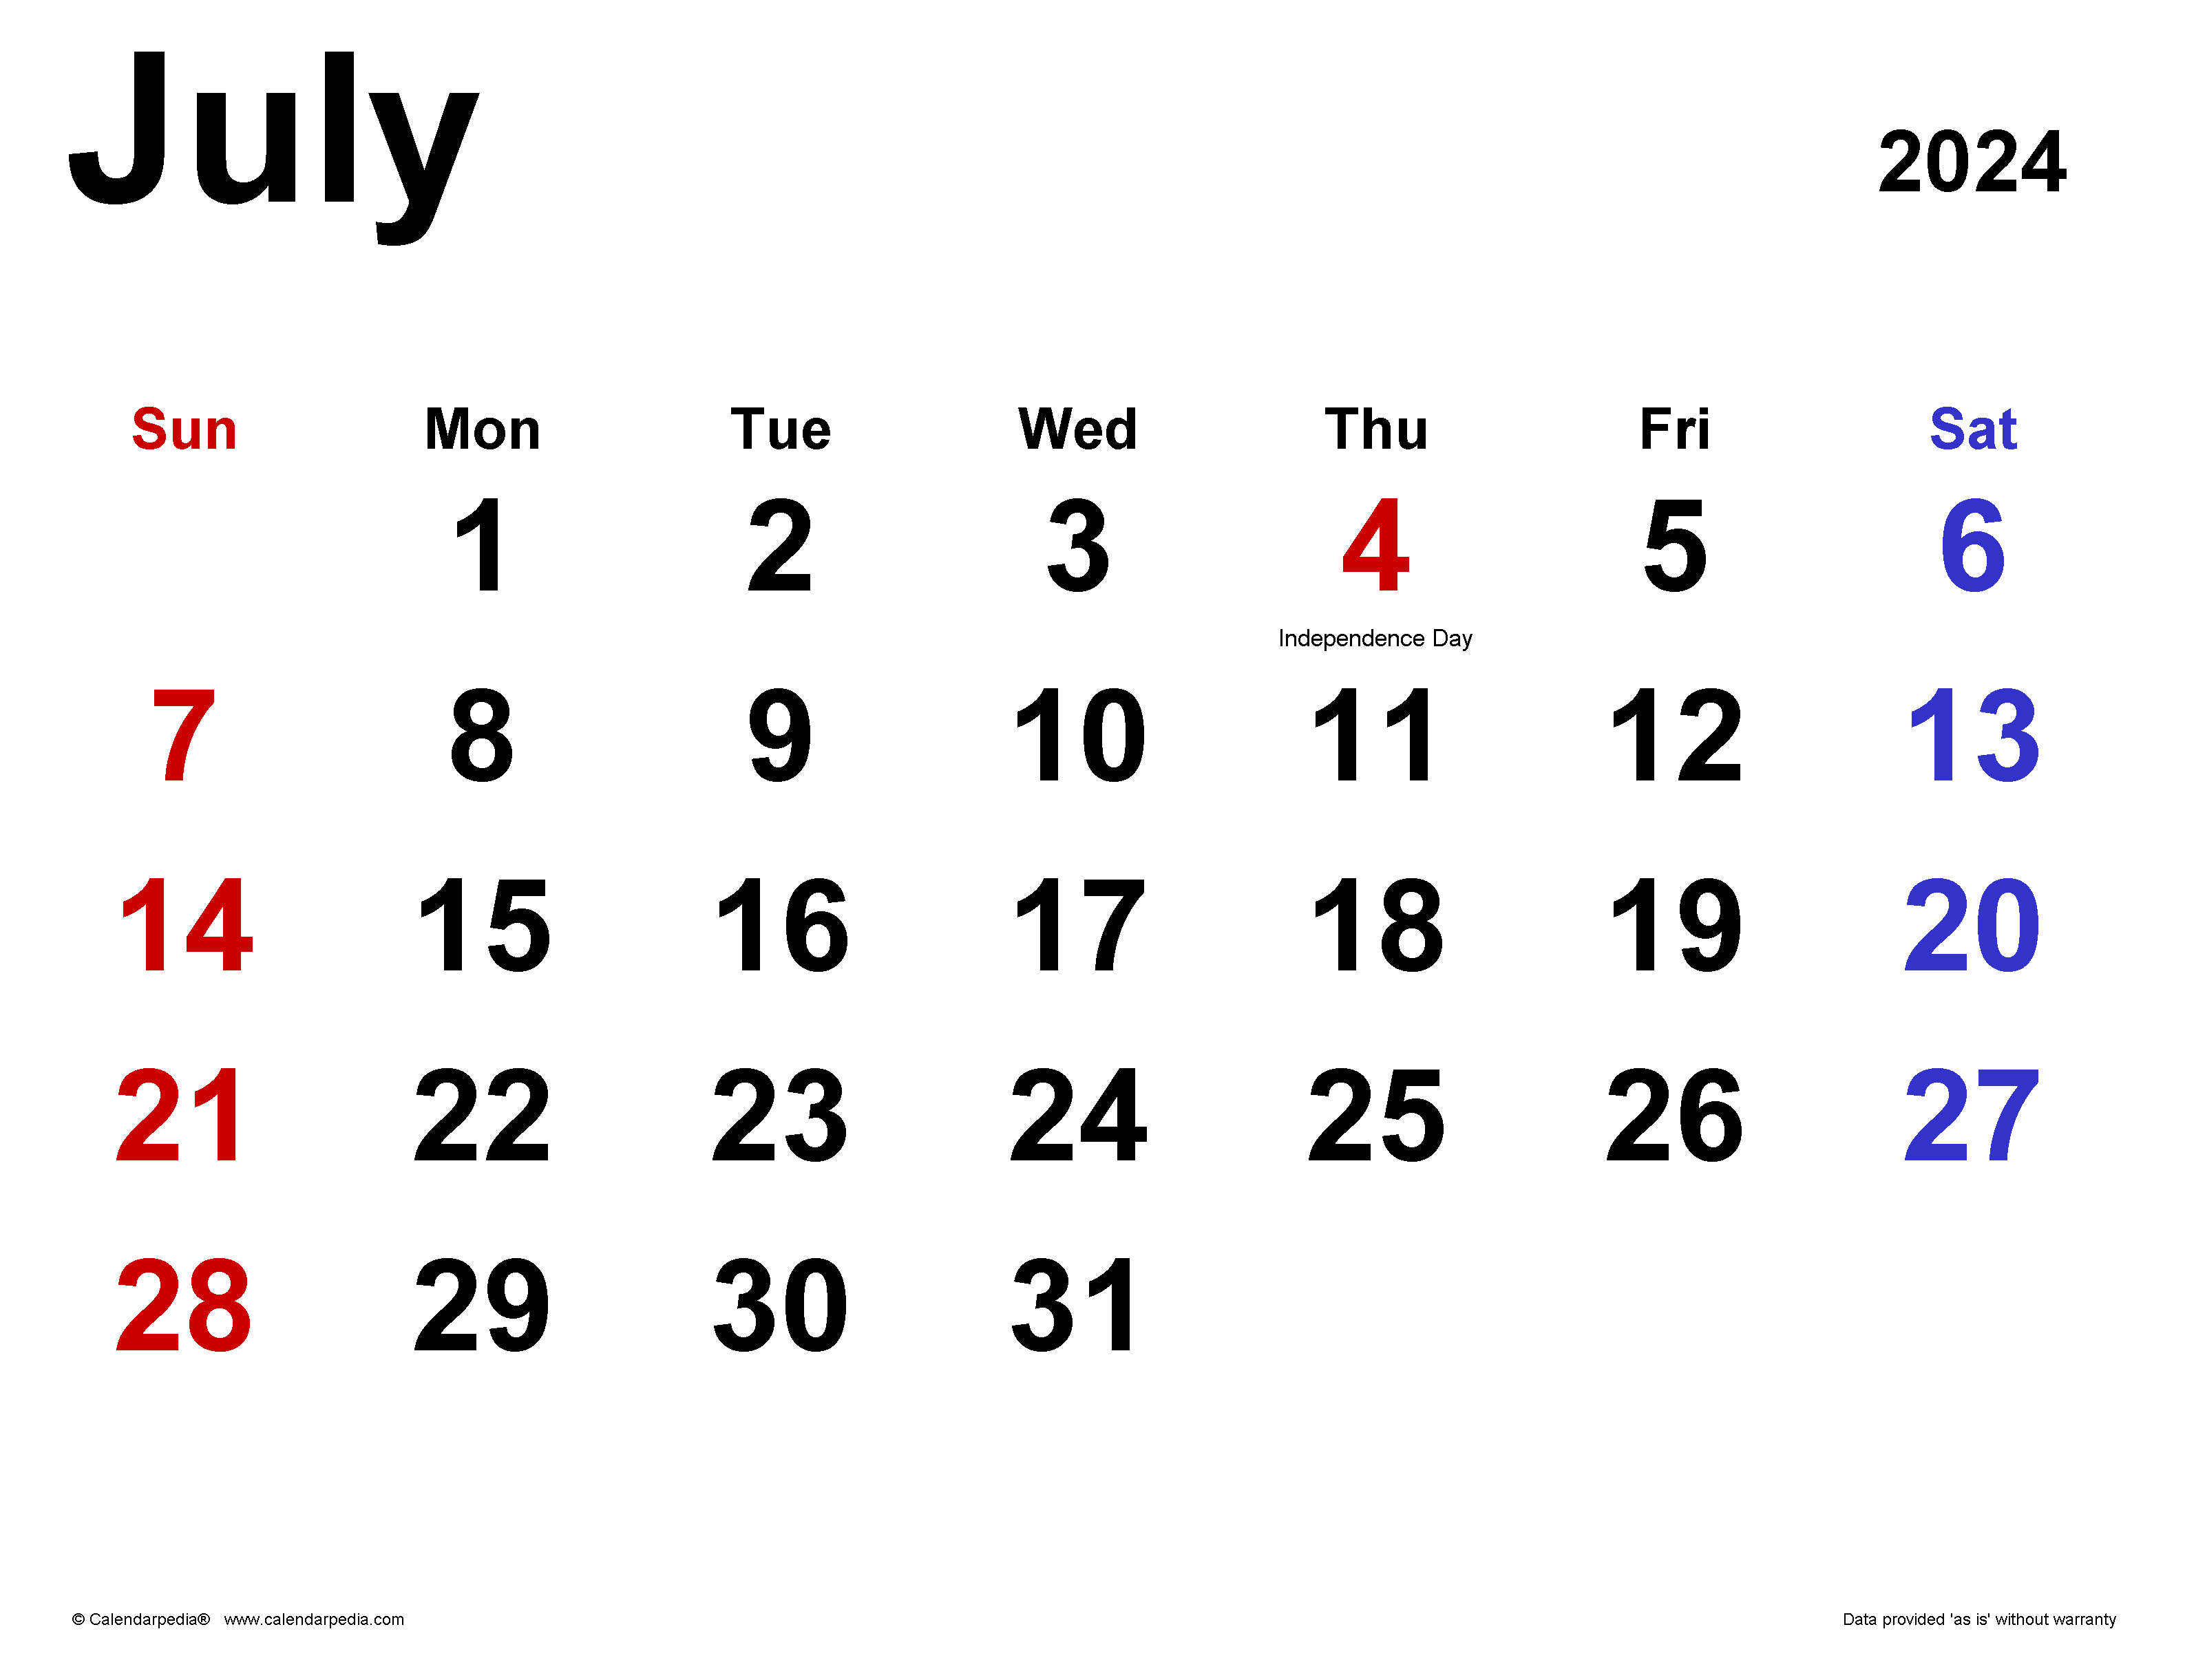 July 2024 Calendar | Templates For Word, Excel And Pdf with regard to 20 Month Desk Calendar Starting July 2024